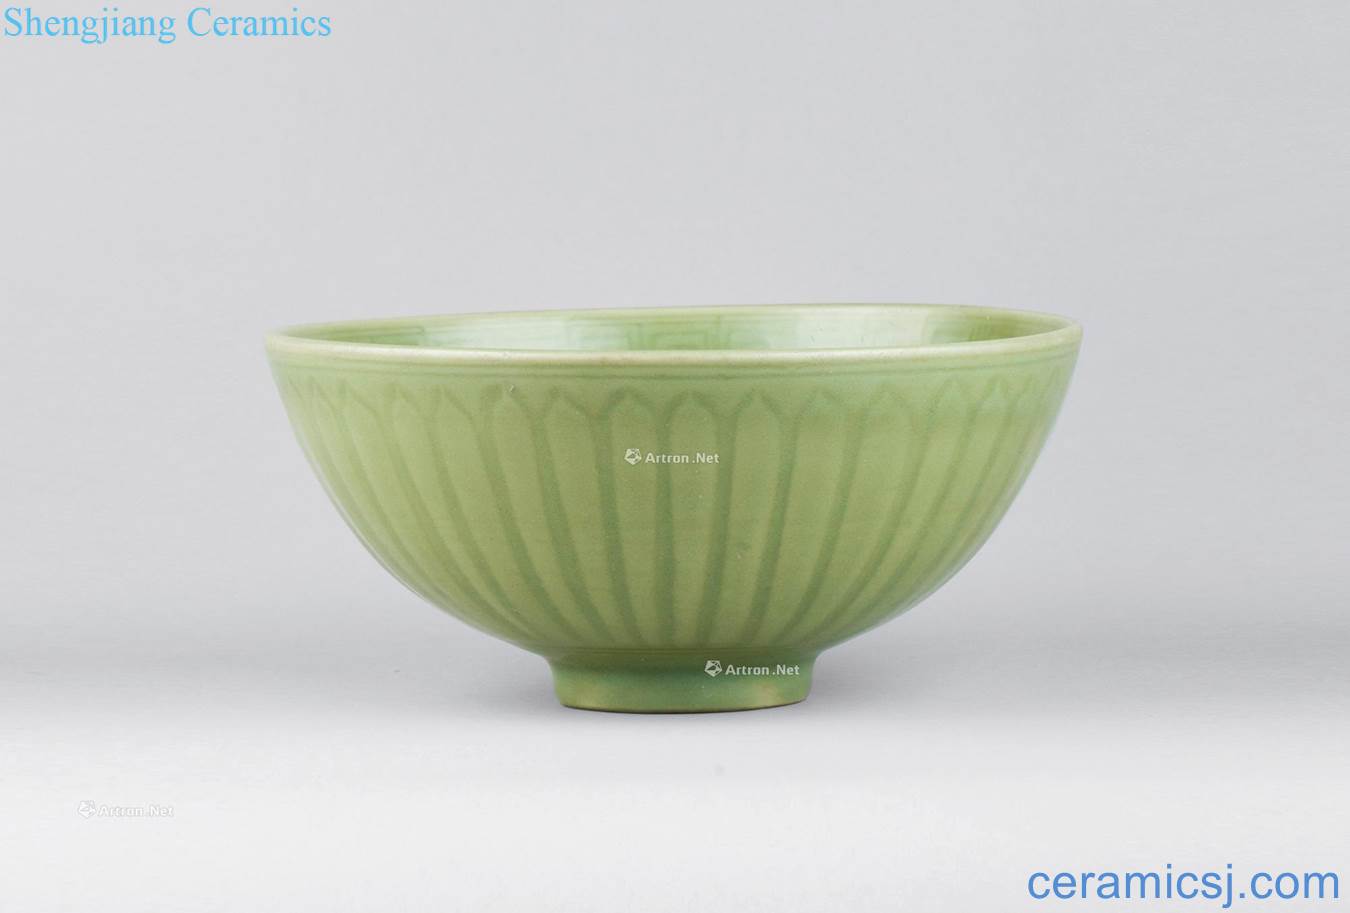 Early Ming dynasty (1368-1441), longquan celadon heart bowl (officer)